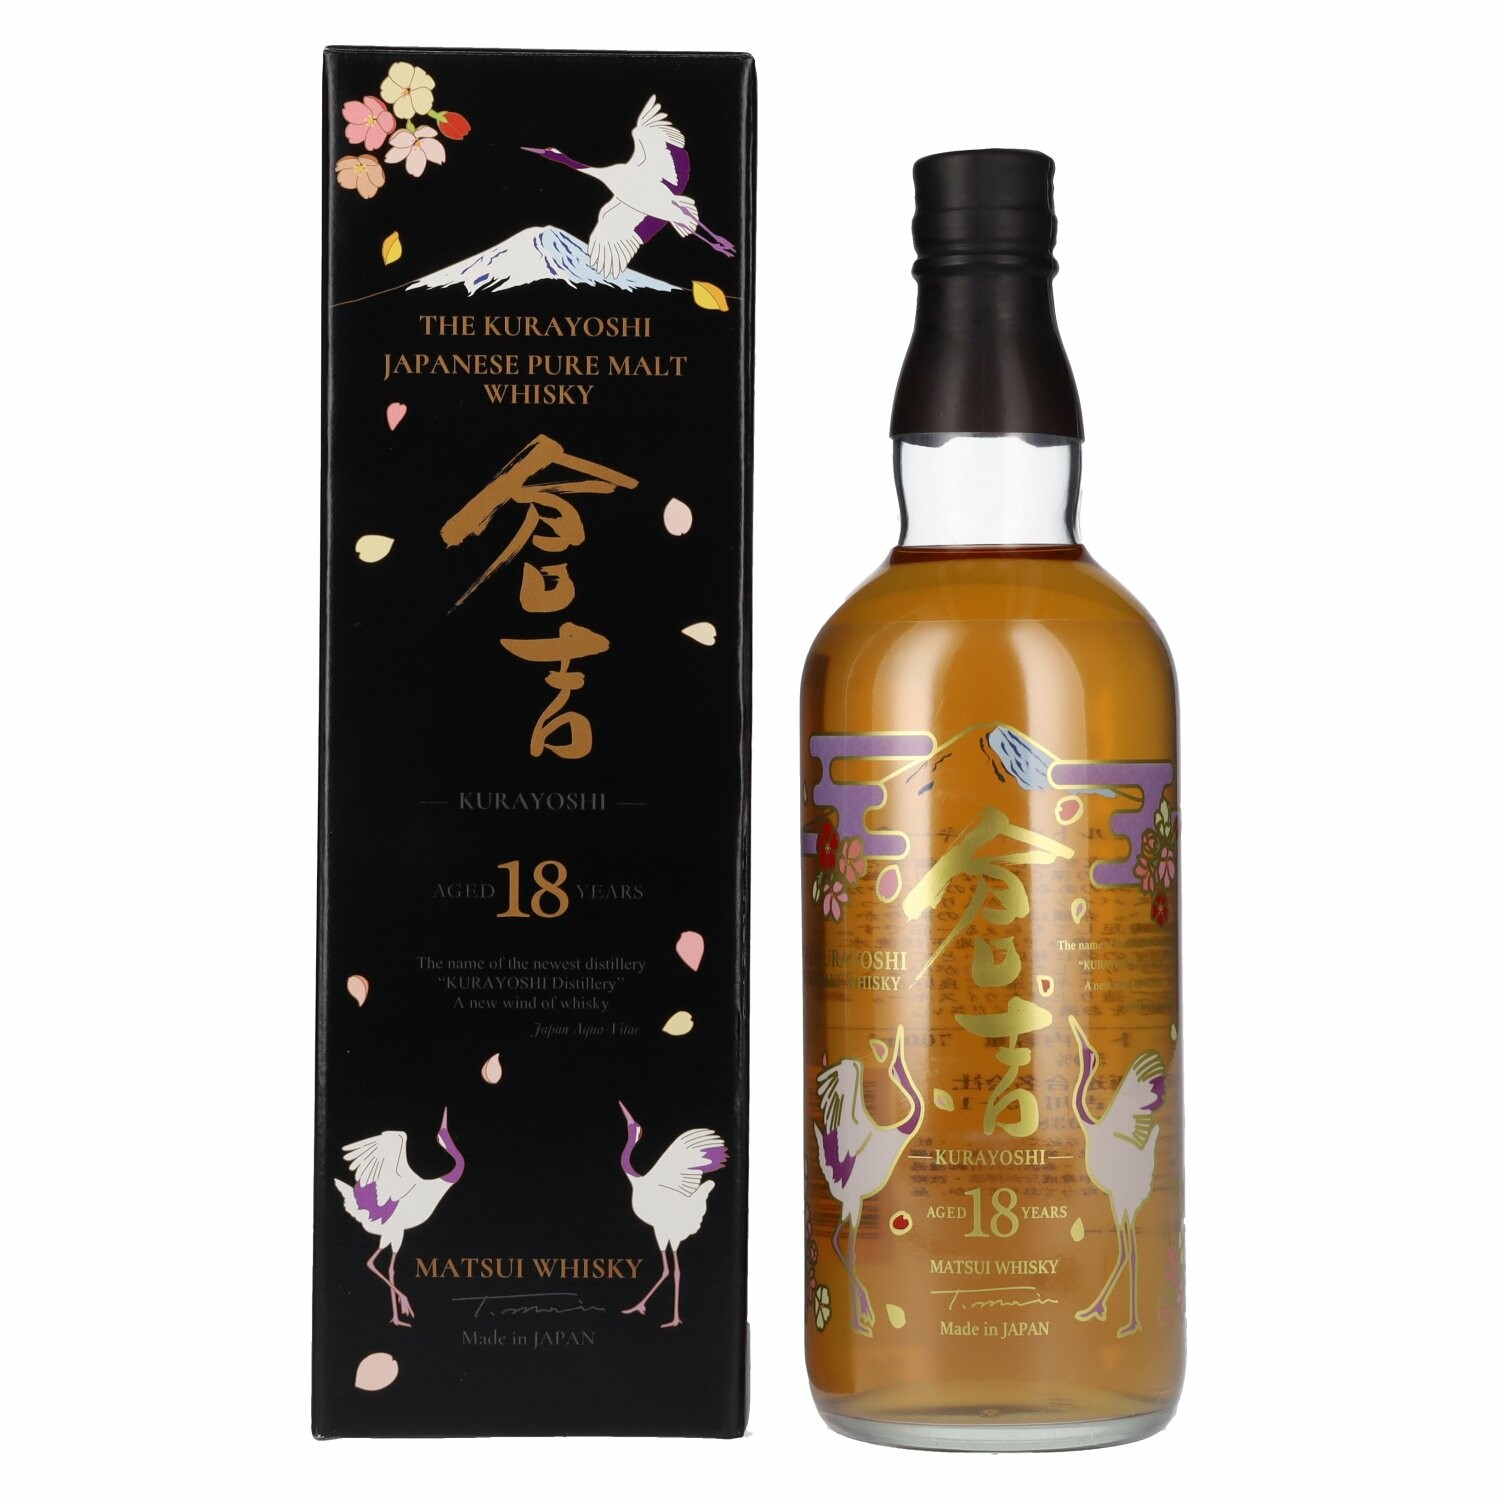 Matsui Whisky THE KURAYOSHI 18 Years Old Pure Malt Whisky 50% Vol. 0,7l in Giftbox